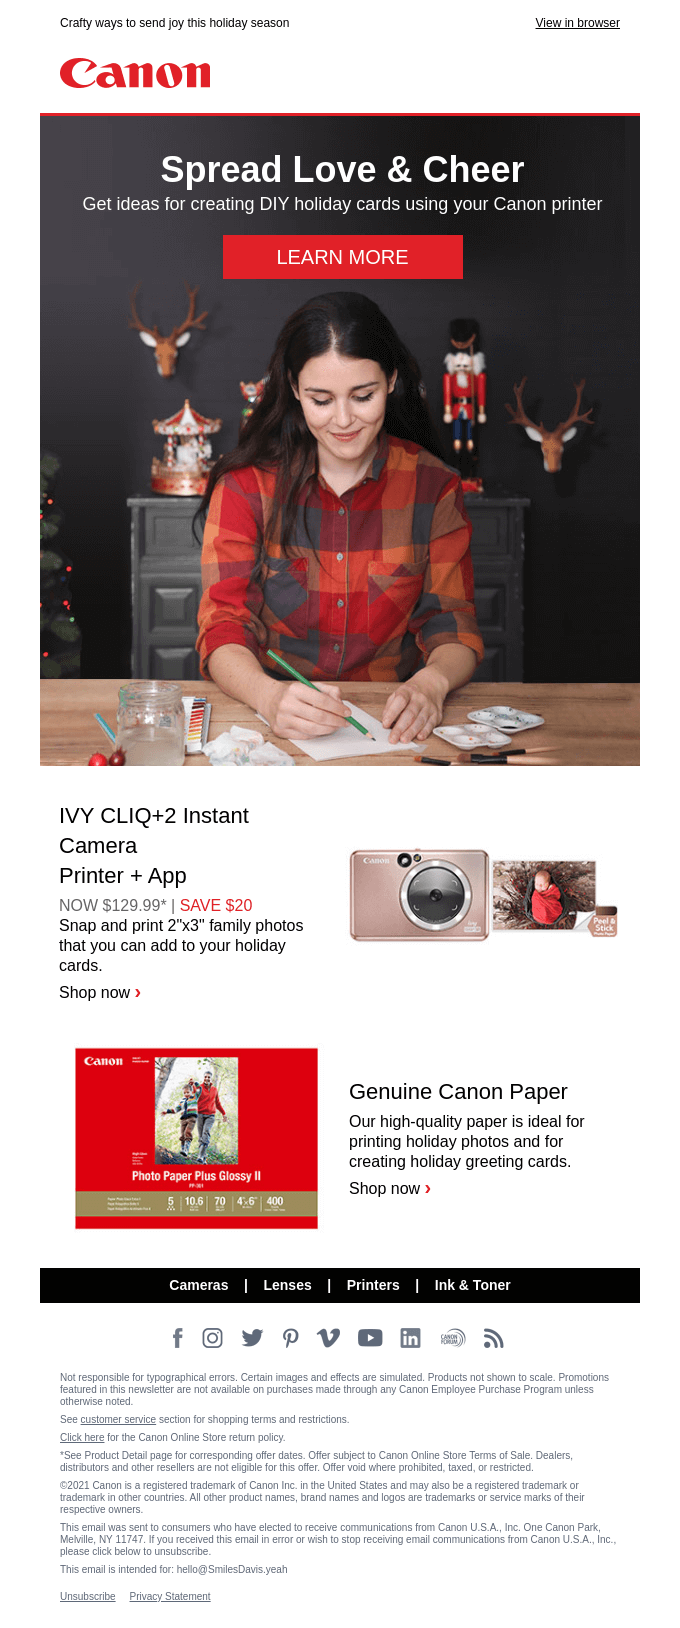 Email campaign telling readers they can make DIY holiday cards with their Canon printer.